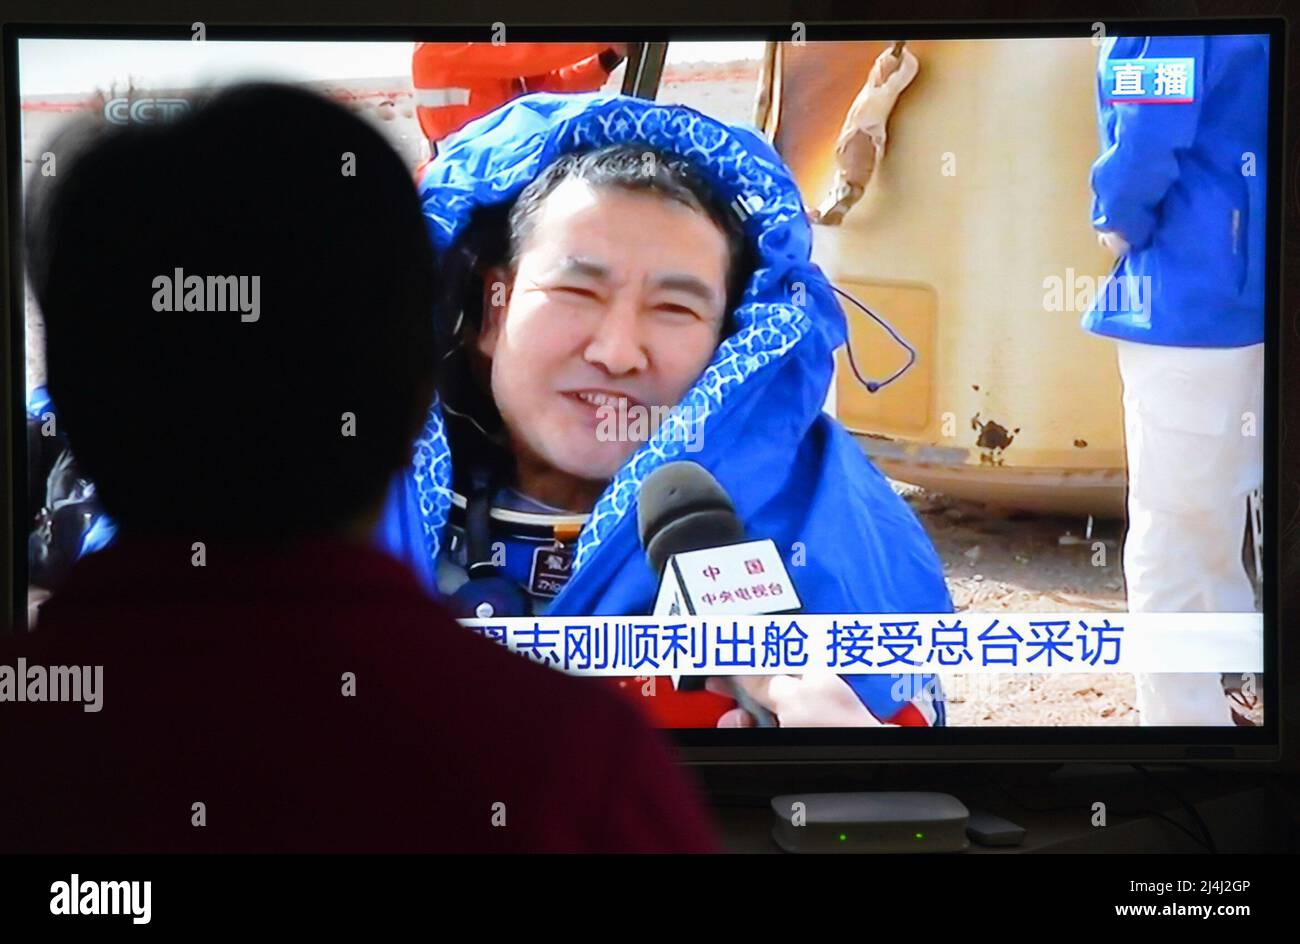 A woman watches a live TV broadcast of the successful landing of the Shenzhou XIII re-entry module. TV screen for the astronaut Zhai Zhigang. After orbiting Earth for six months, the three crew members of China's Shenzhou XIII mission have departed from the Tiangong space station and returned to the mother planet on Saturday morning, finishing the nation's longest manned spaceflight.Major General Zhai Zhigang, who was the mission commander, Senior Colonel Wang Yaping and Senior Colonel Ye Guangfu breathed fresh air for the first time after the half-year space journey as ground recovery personn Stock Photo